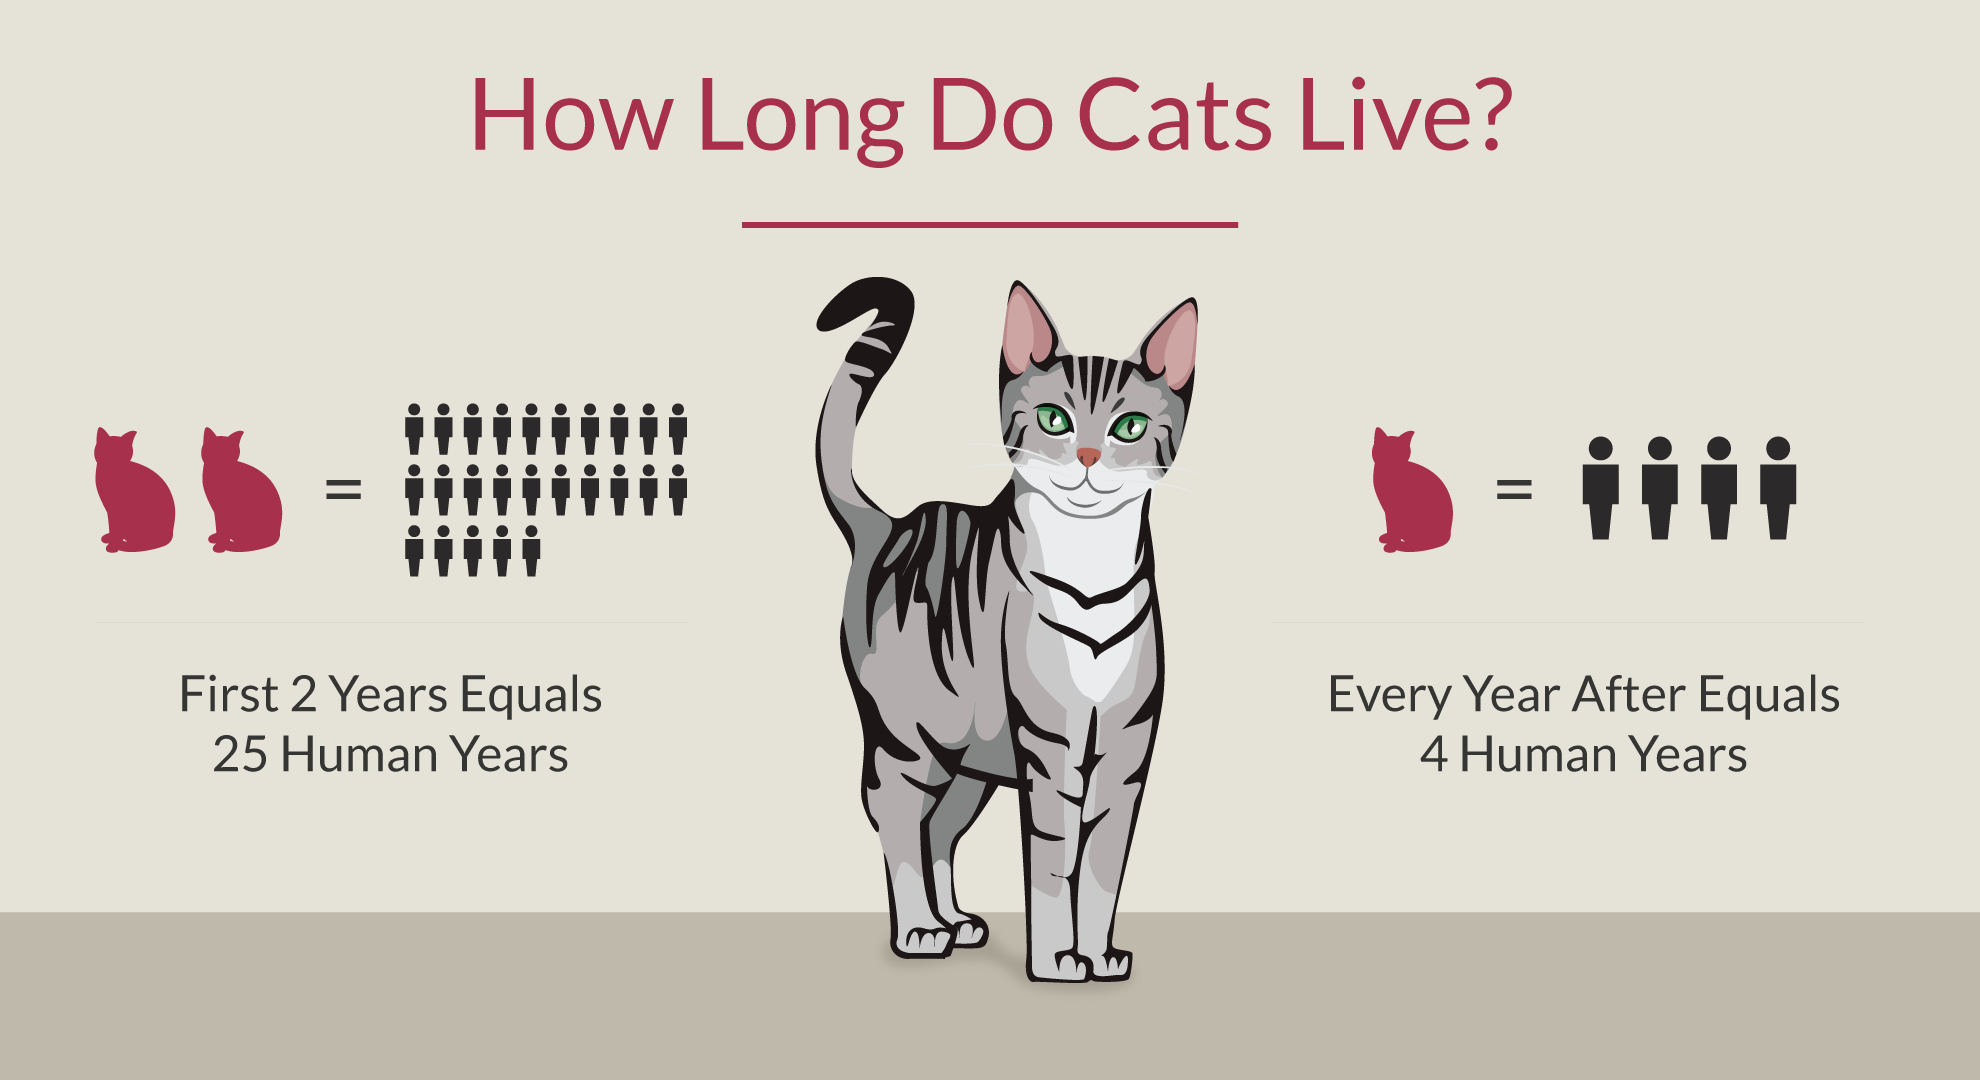 How Long do Cats Live?